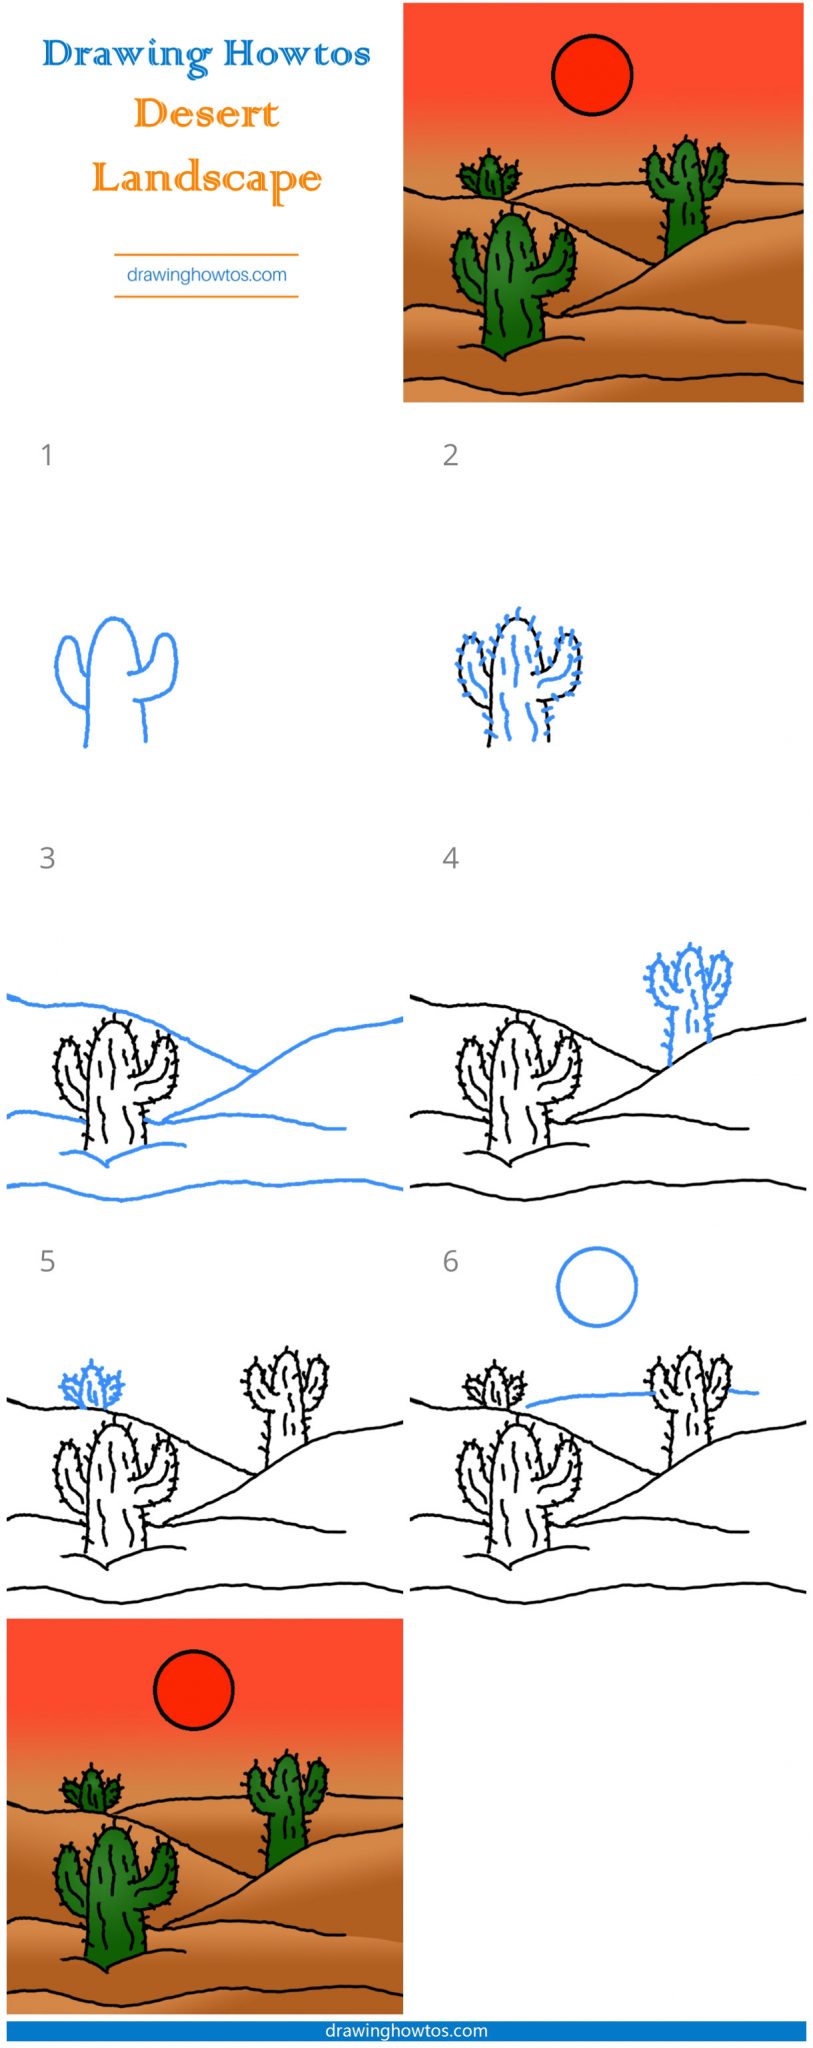 How to Draw a Desert Landscape Step by Step Easy Drawing Guides